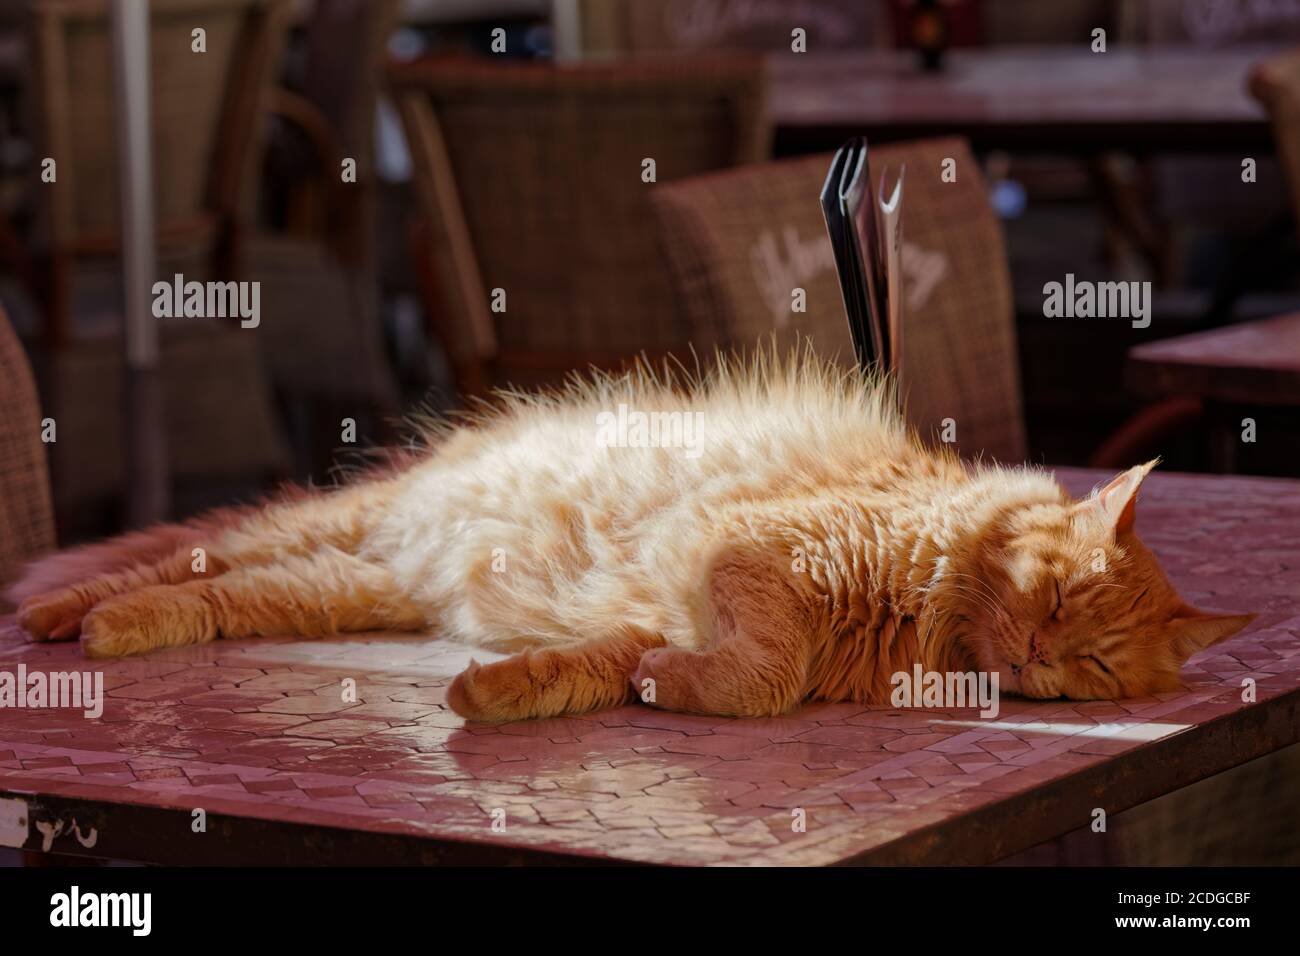 Ginger cat sleeping on a mosaic table of a street cafe Stock Photo